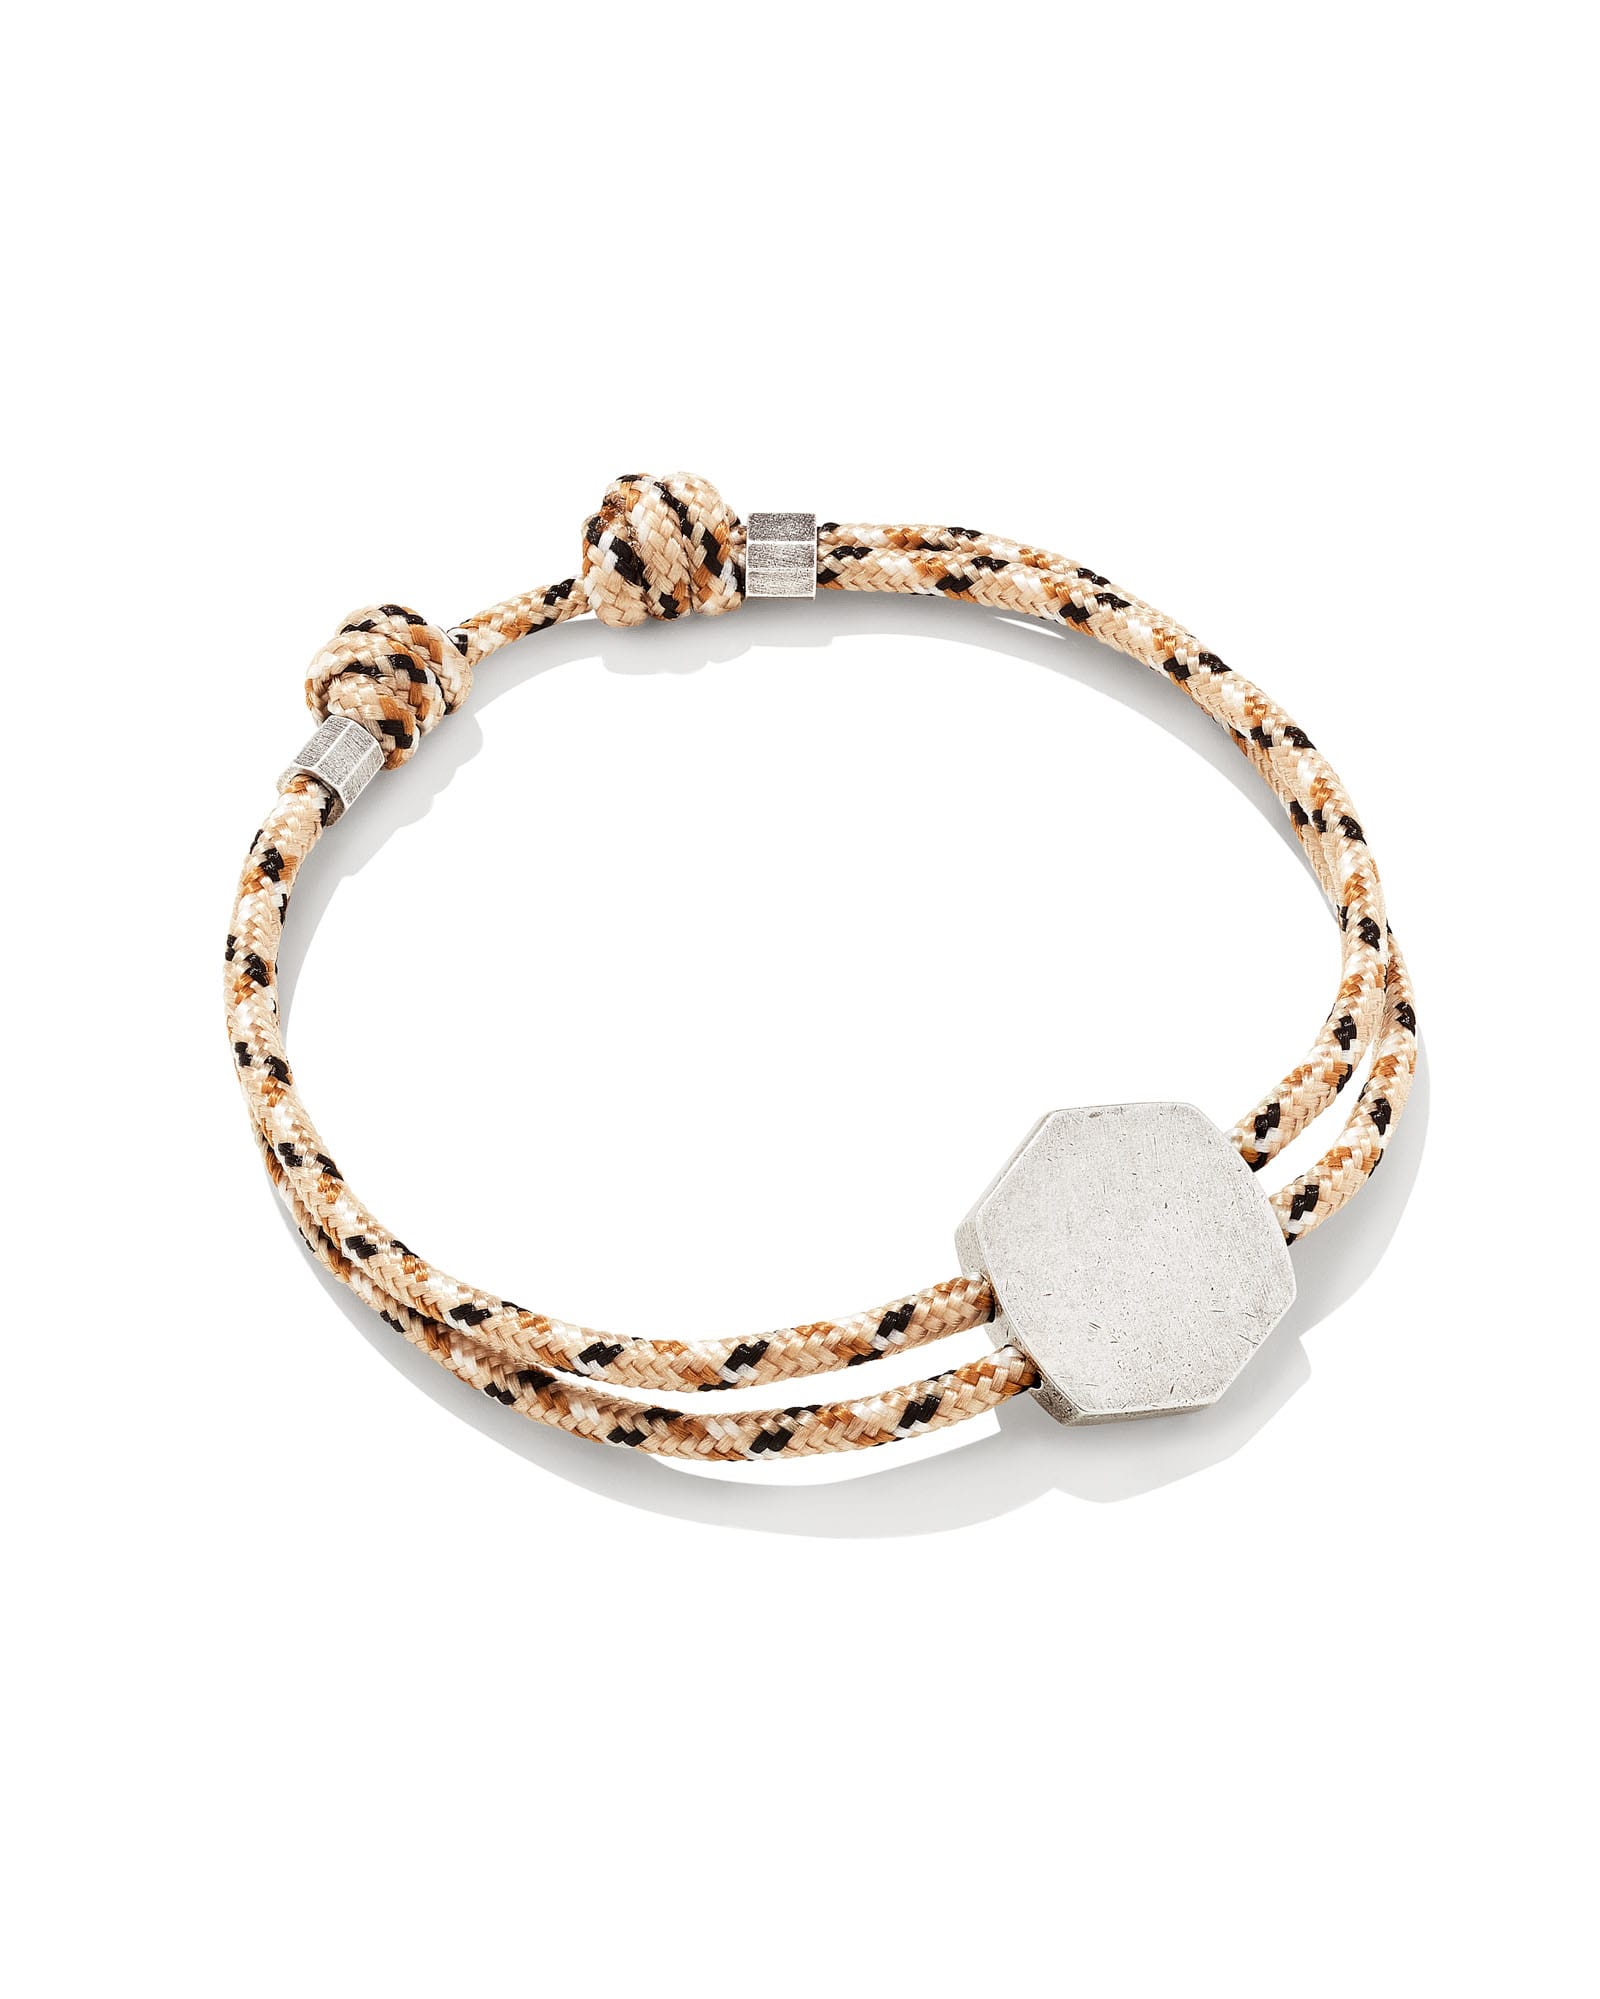 Kendra Scott Kenneth Oxidized Sterling Silver Corded Engravable Bracelet in Neutral Mix | Paracord